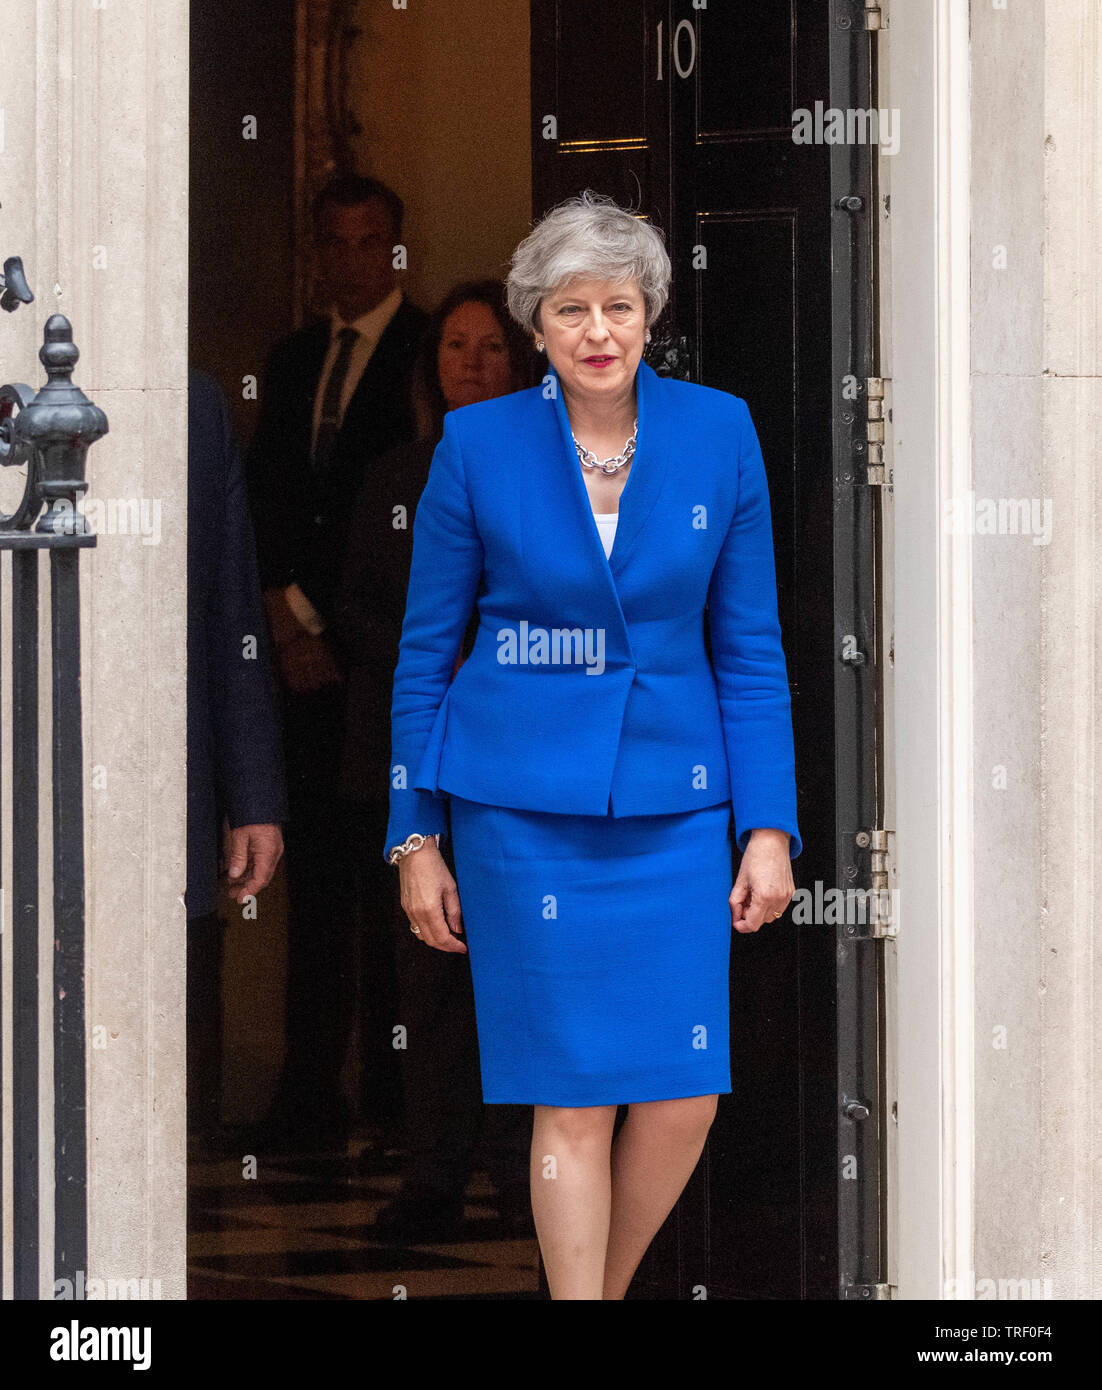 London 4th June 2019  President Trump visits Theresa May MP PC, Prime Minister in Dowing Street Donald Trump, Melania Trump, Theresa May and Philip May leave Downing Street for a press conference  Credit Ian Davidson Alamy Live News Stock Photo